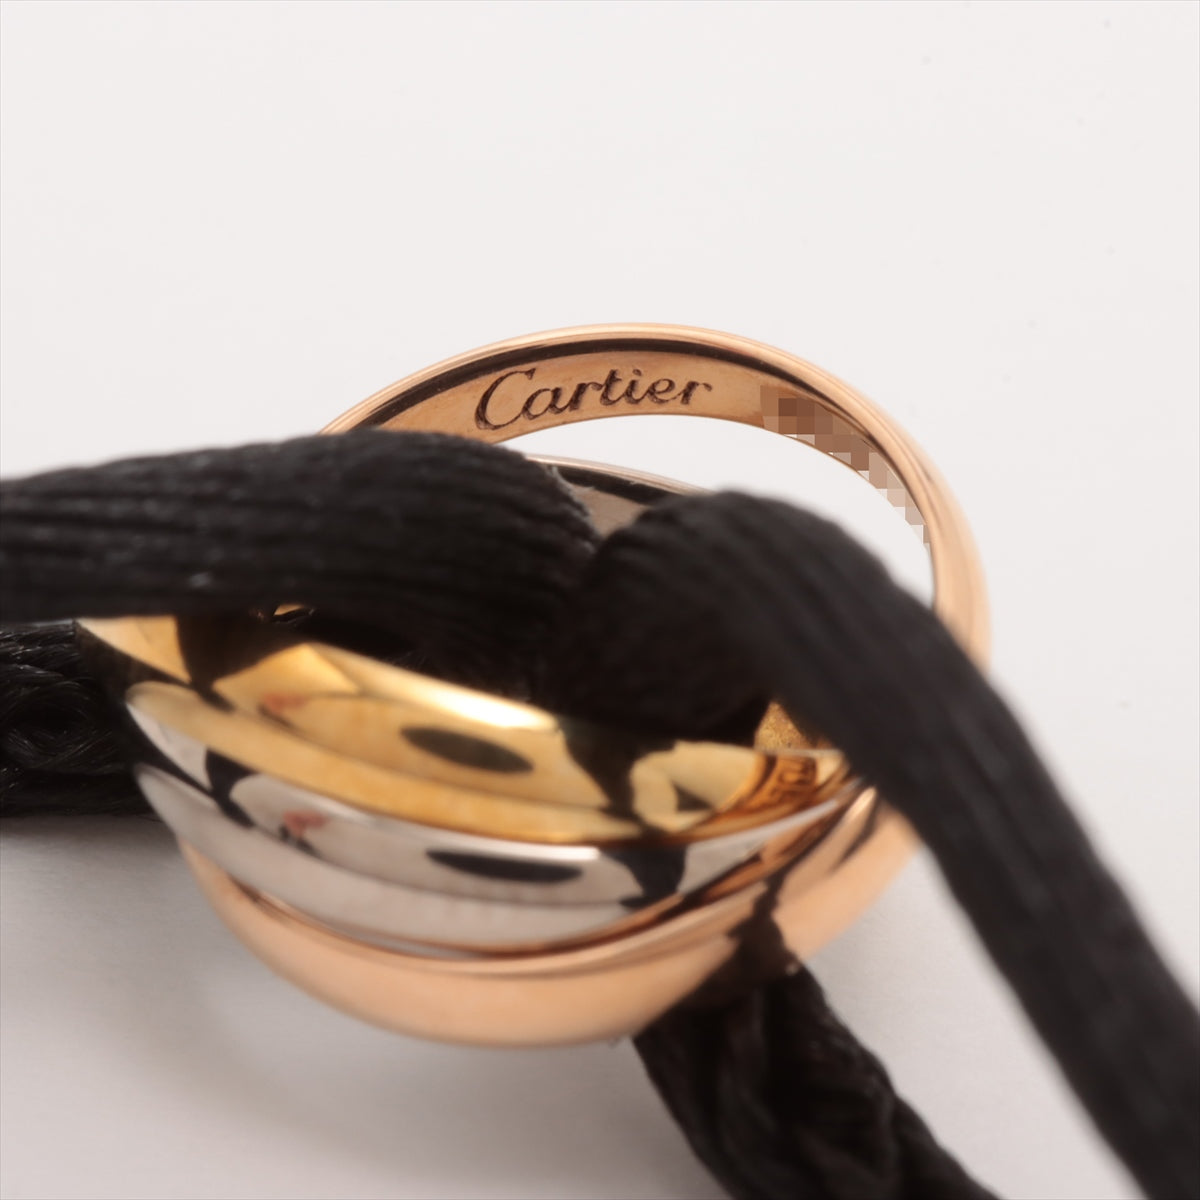 Cartier Trinity Code Bracelet 750 (YGPG×WG) Total 2.7g  4 replacement codes